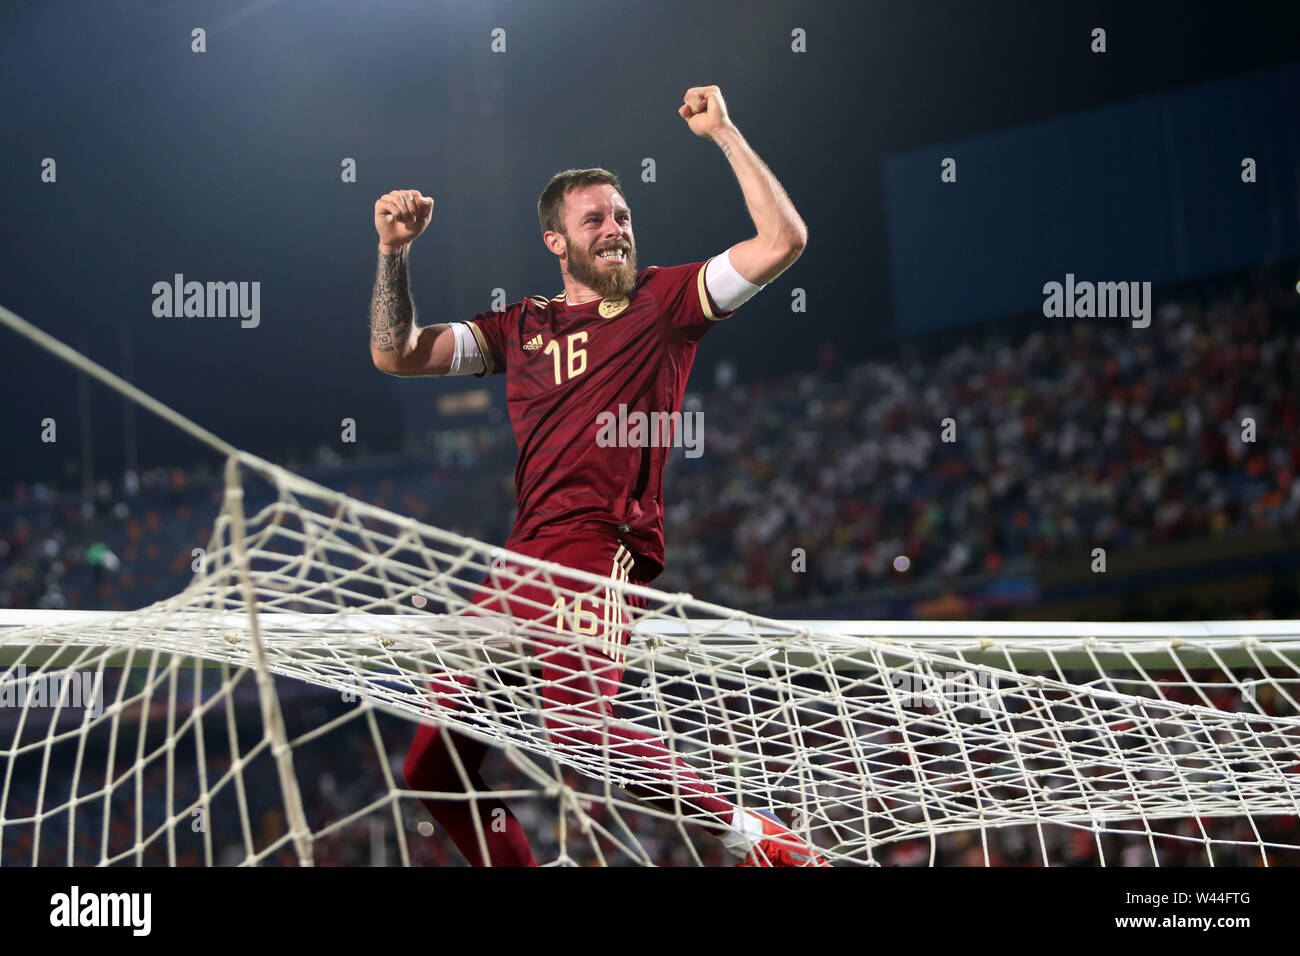 Cairo. 19th July, 2019. Algeria's goalkeeper Alexandre Oukidja celebrates after winning the 2019 Africa Cup of Nations final match between Senegal and Algeria in Cairo, Egypt on July 19, 2019. Algeria won 1-0 and claimed the title. Credit: Ahmed Gomaa/Xinhua/Alamy Live News Stock Photo